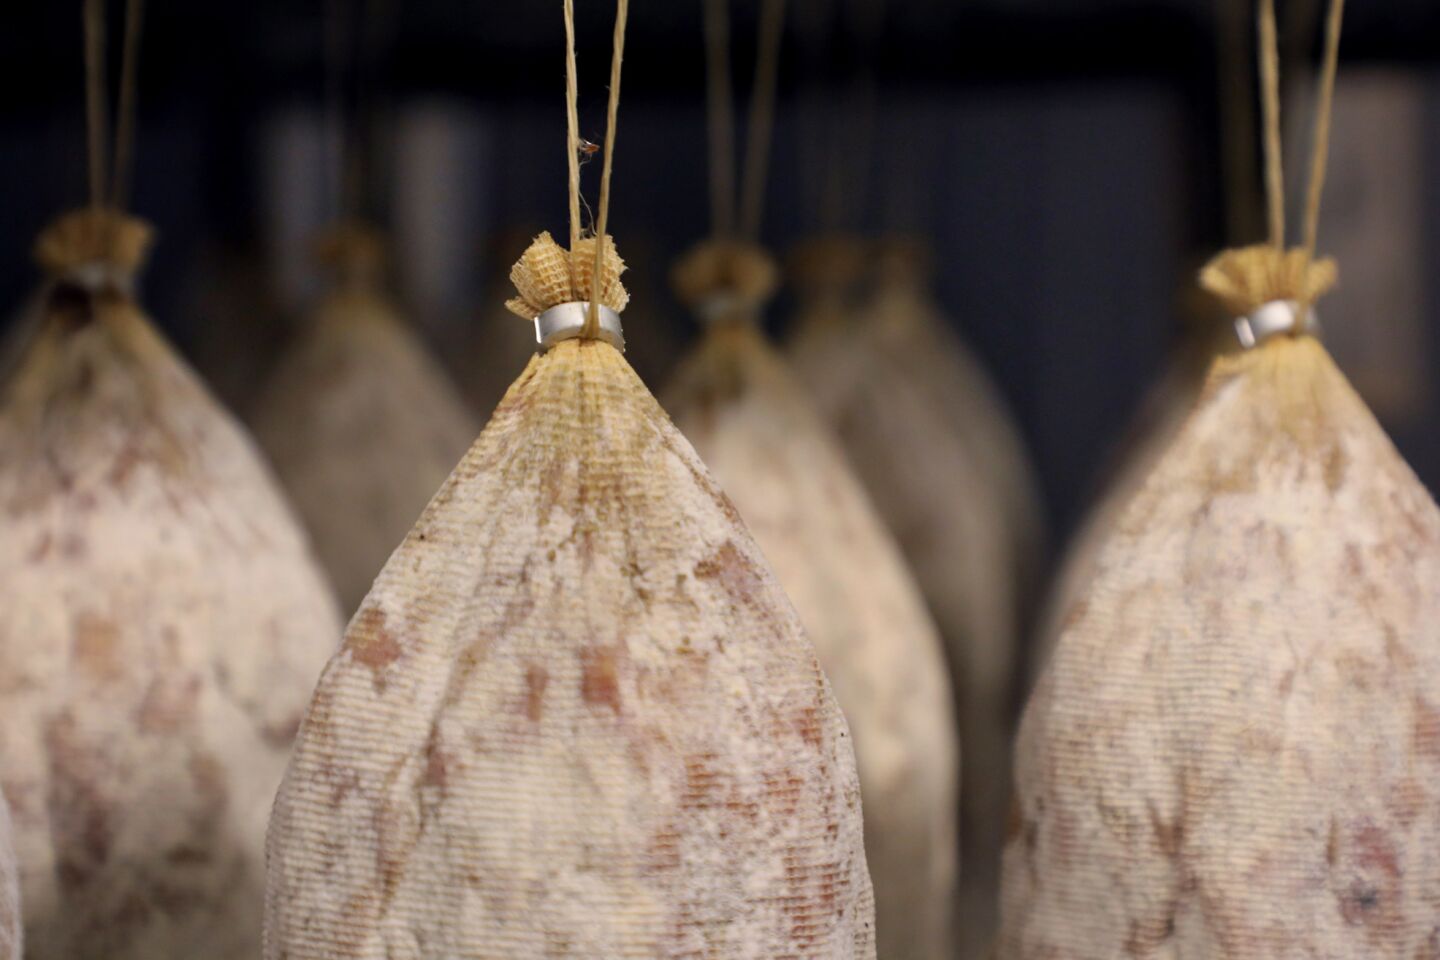 The old world tradition of salami-making